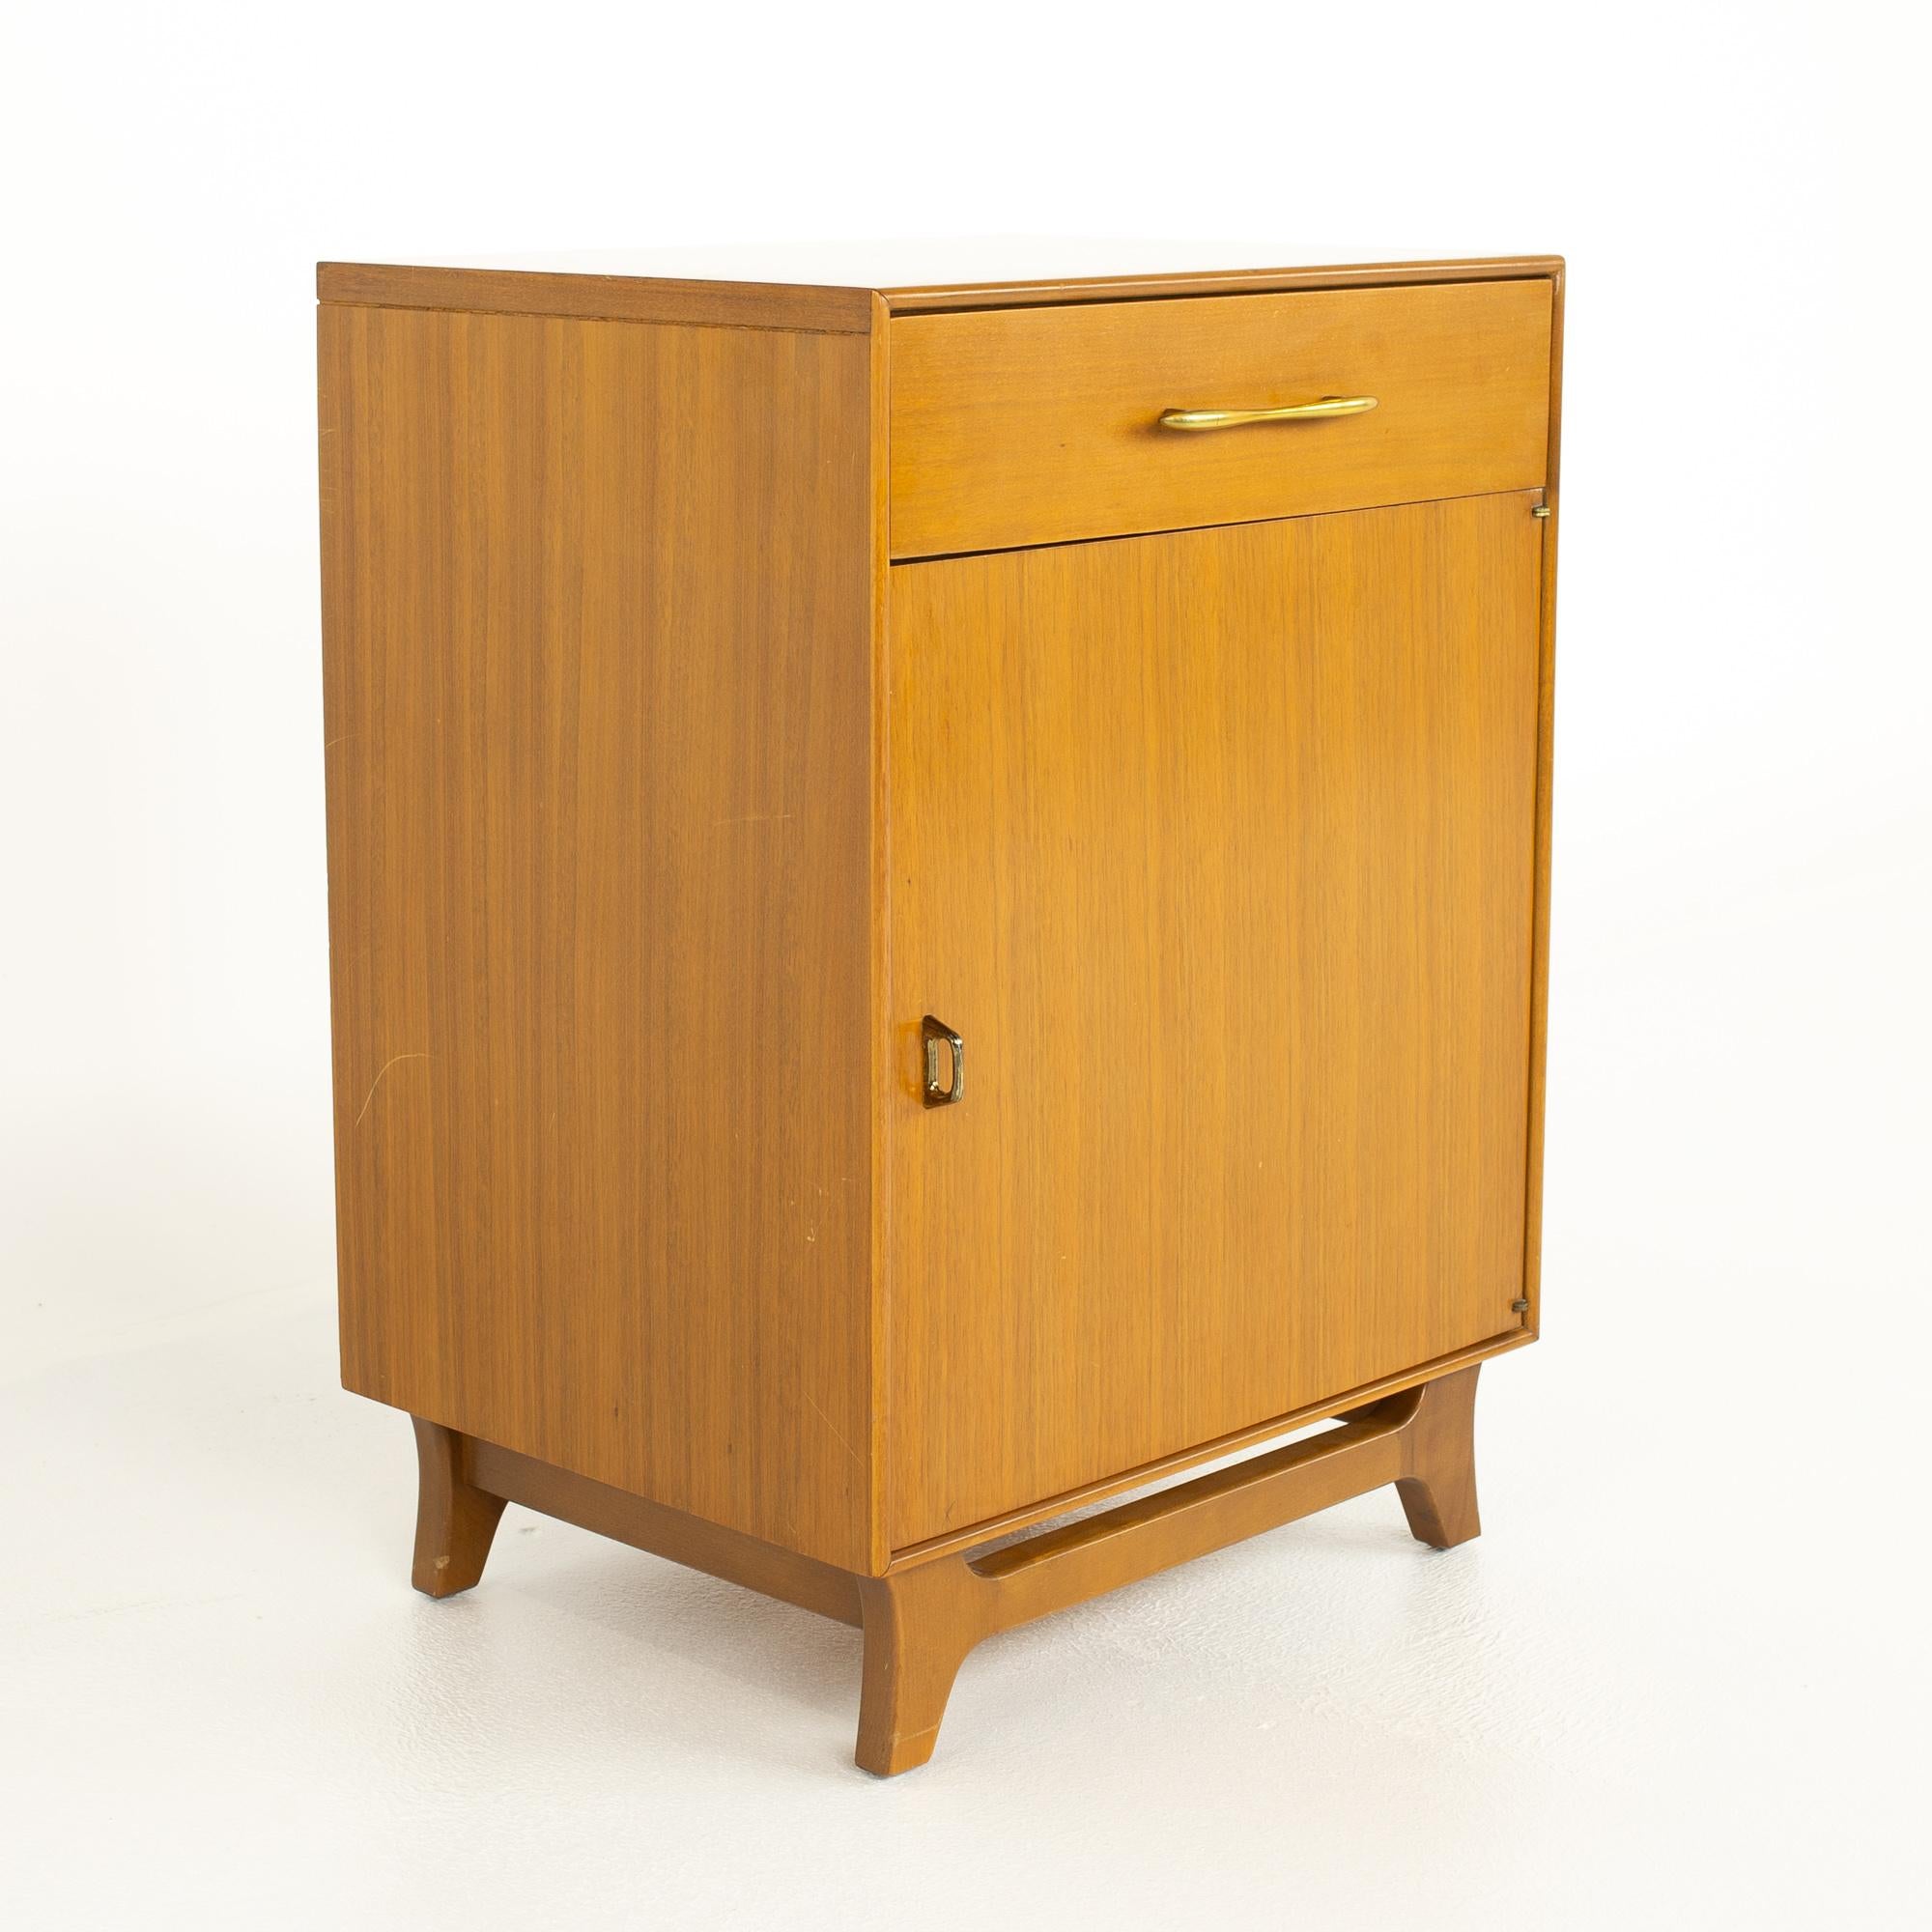 Late 20th Century Rway Mid Century Walnut and Brass Nightstands - A Pair